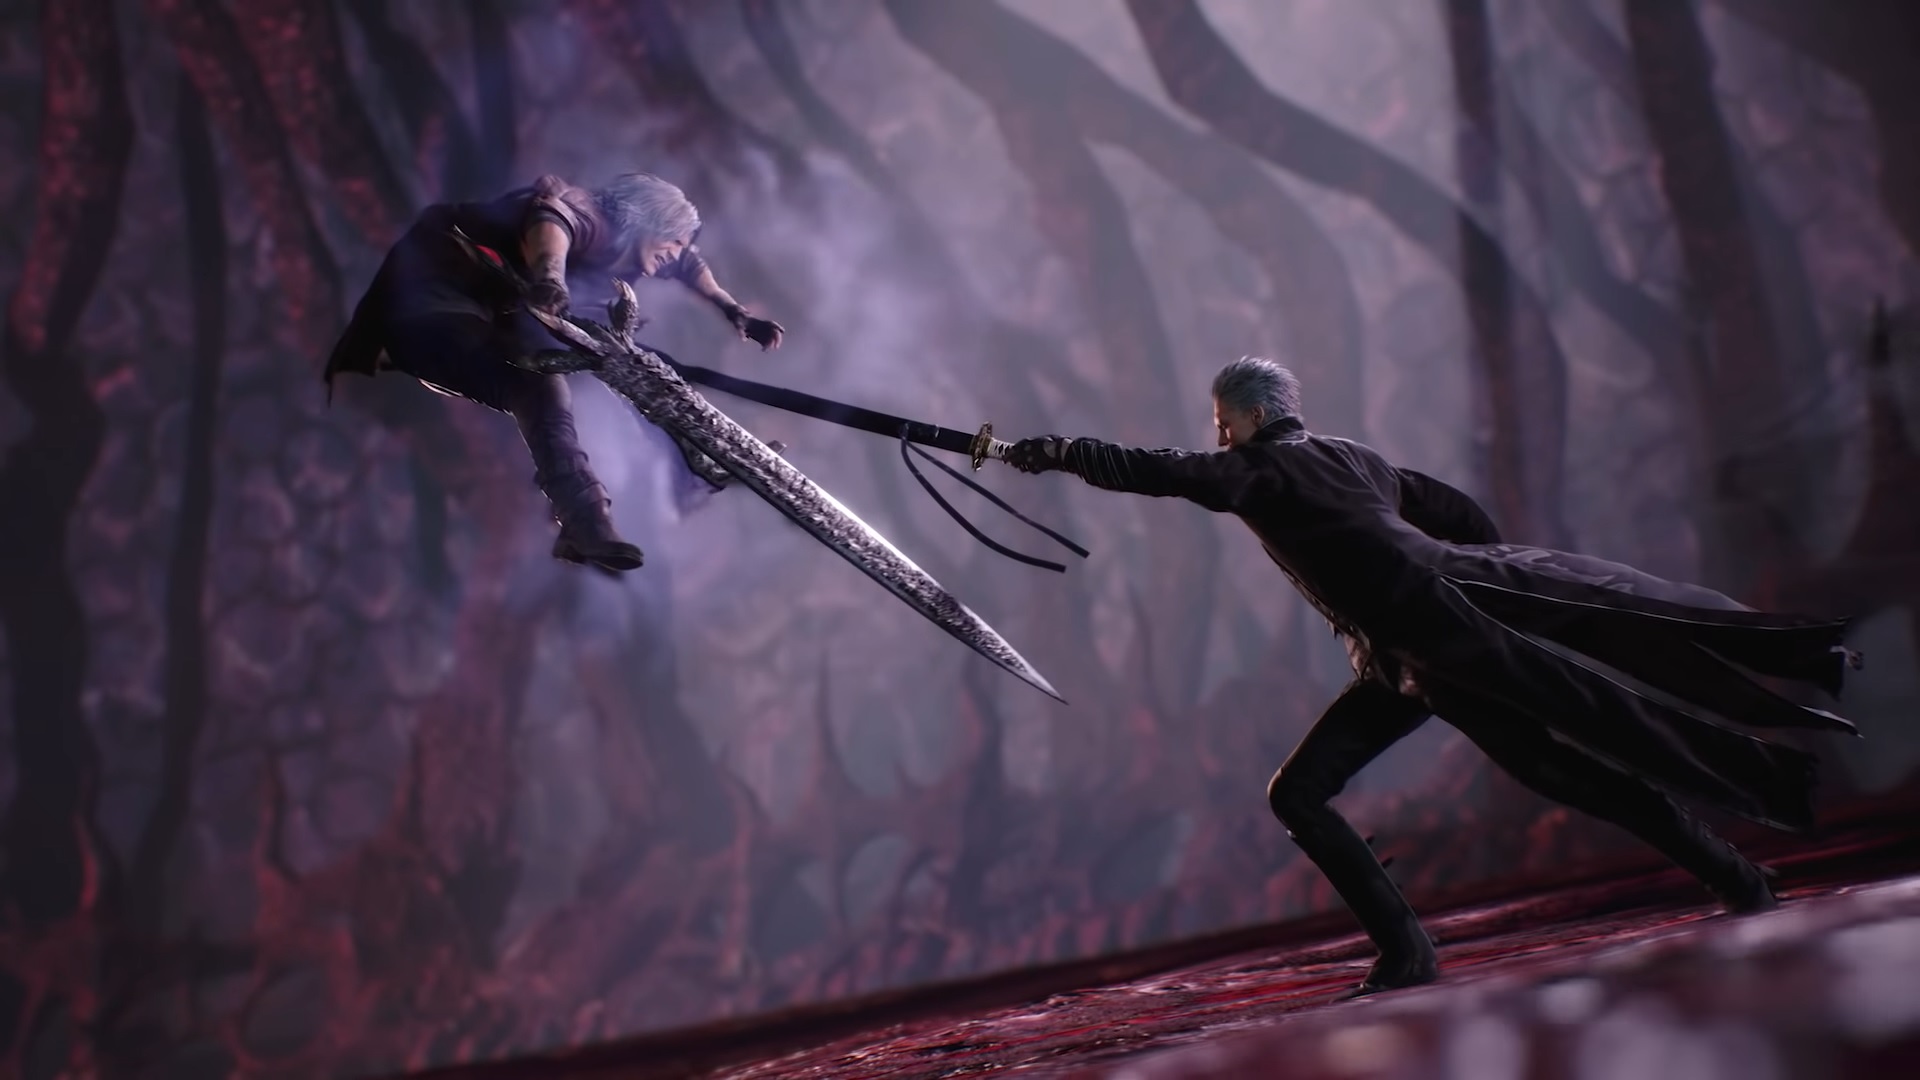 Devil May Cry 4 Special Edition - New Vergil cutscenes 